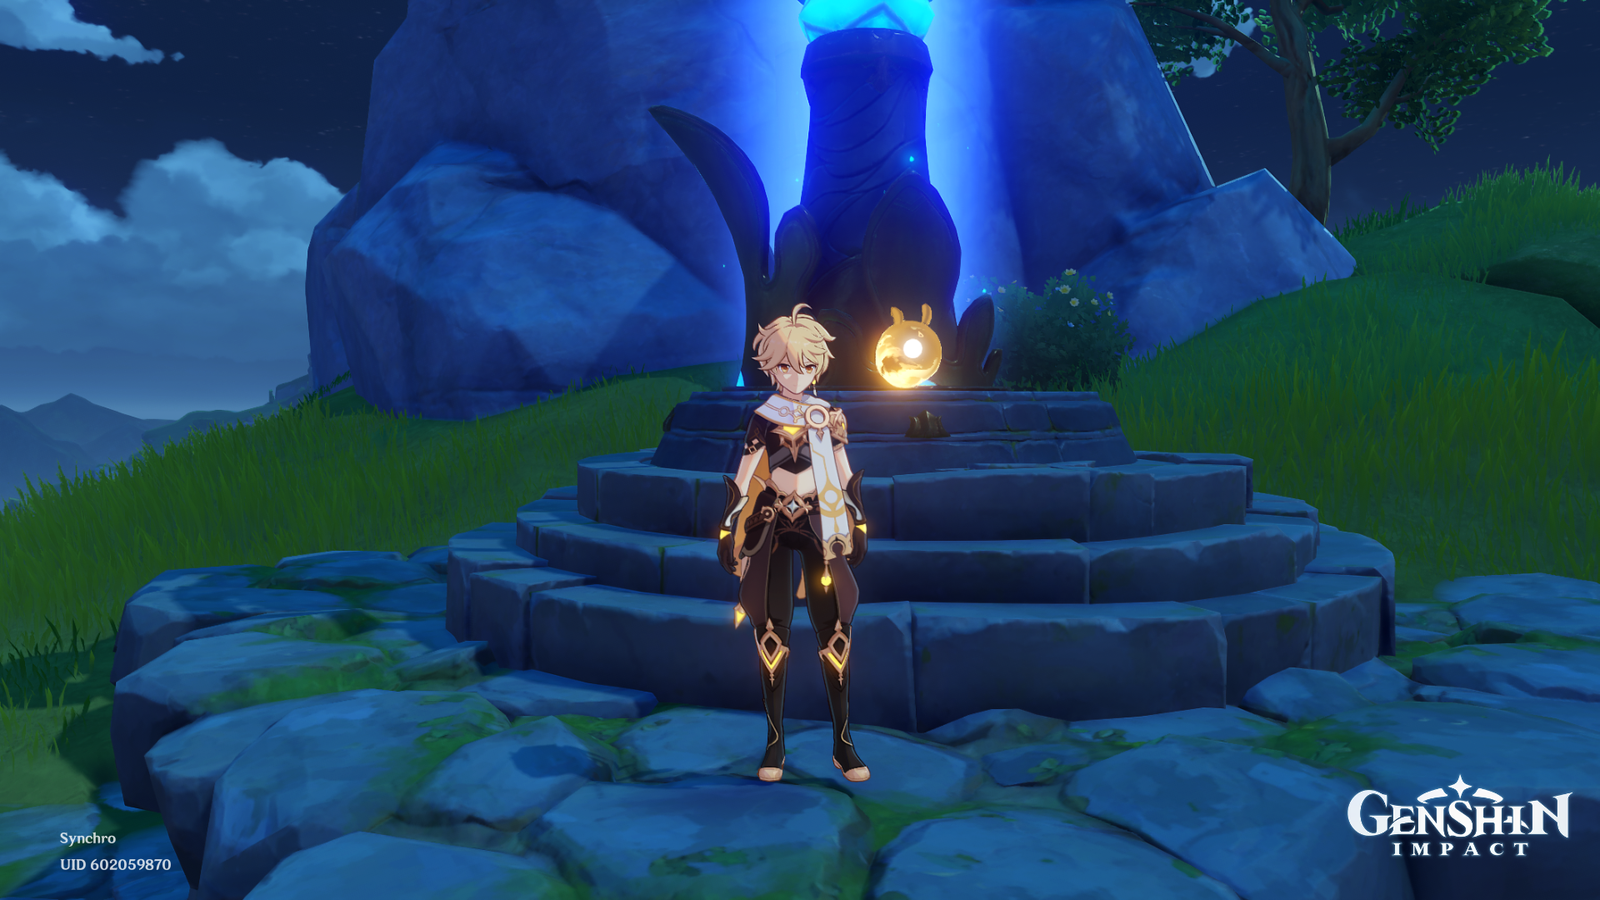 The Traveler standing beside a Statue of the Seven